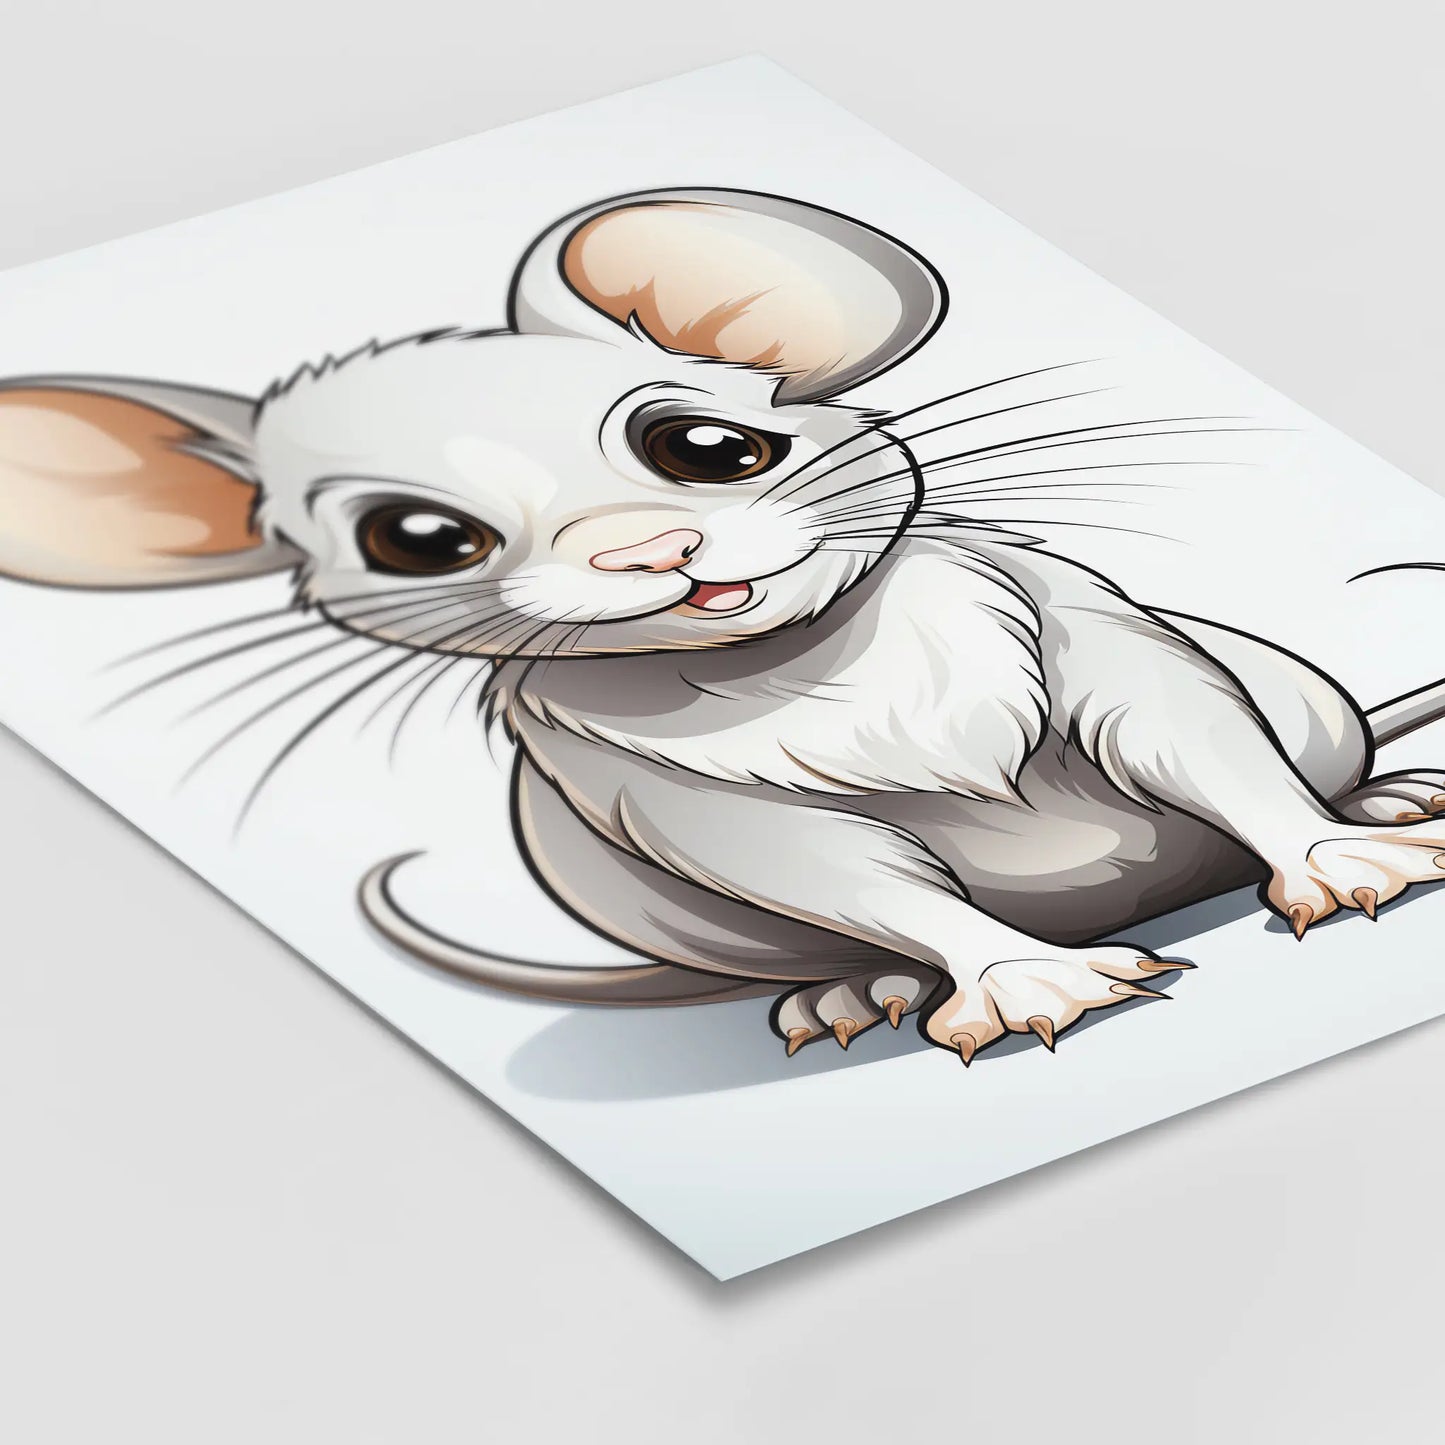 Mouse No 2 - Comic Style - Poster